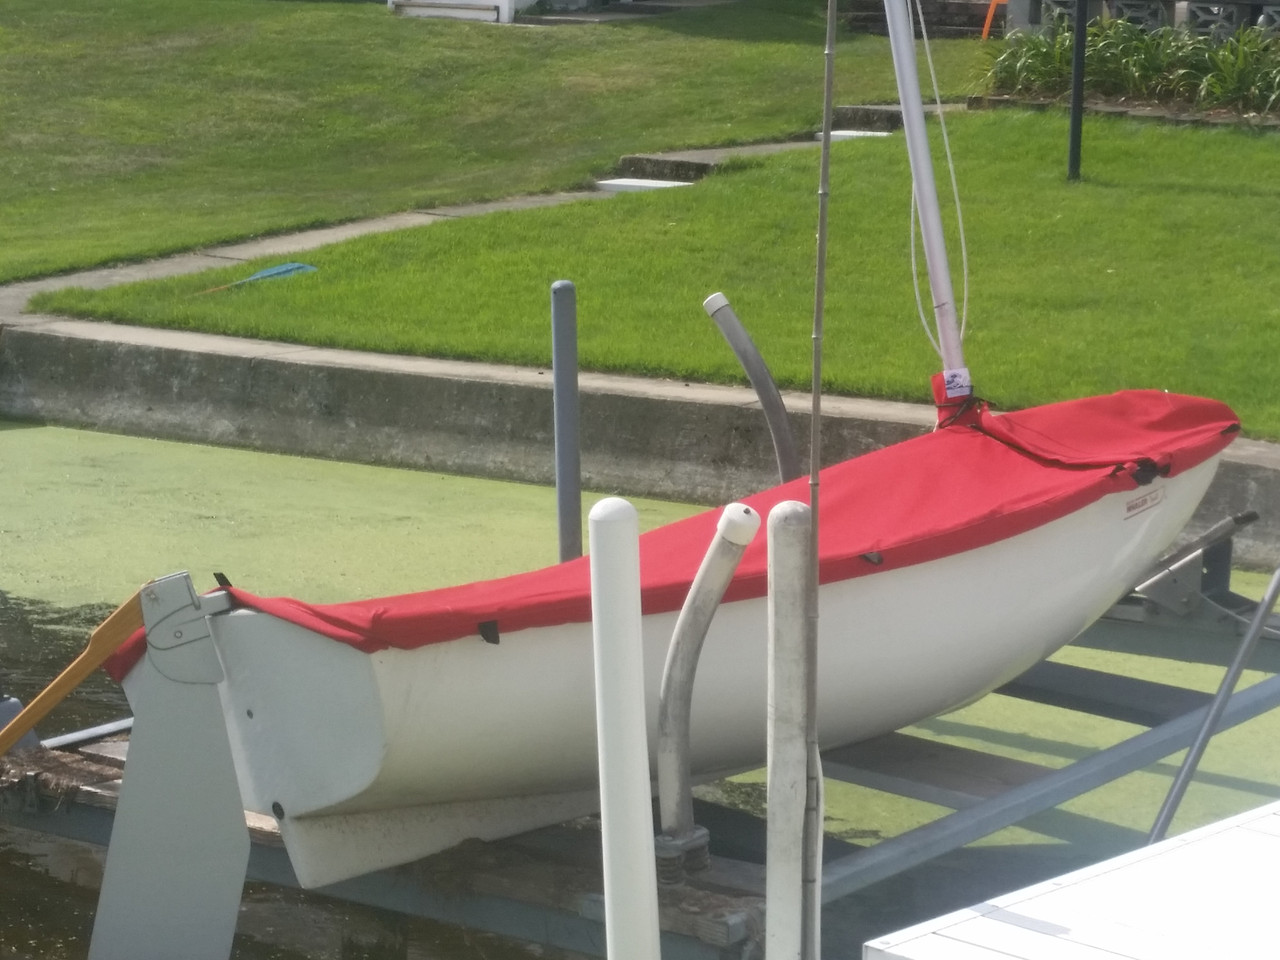 Our Mast Up Flat Cover allows you to store your Boston Whaler Squall with the mast in place.